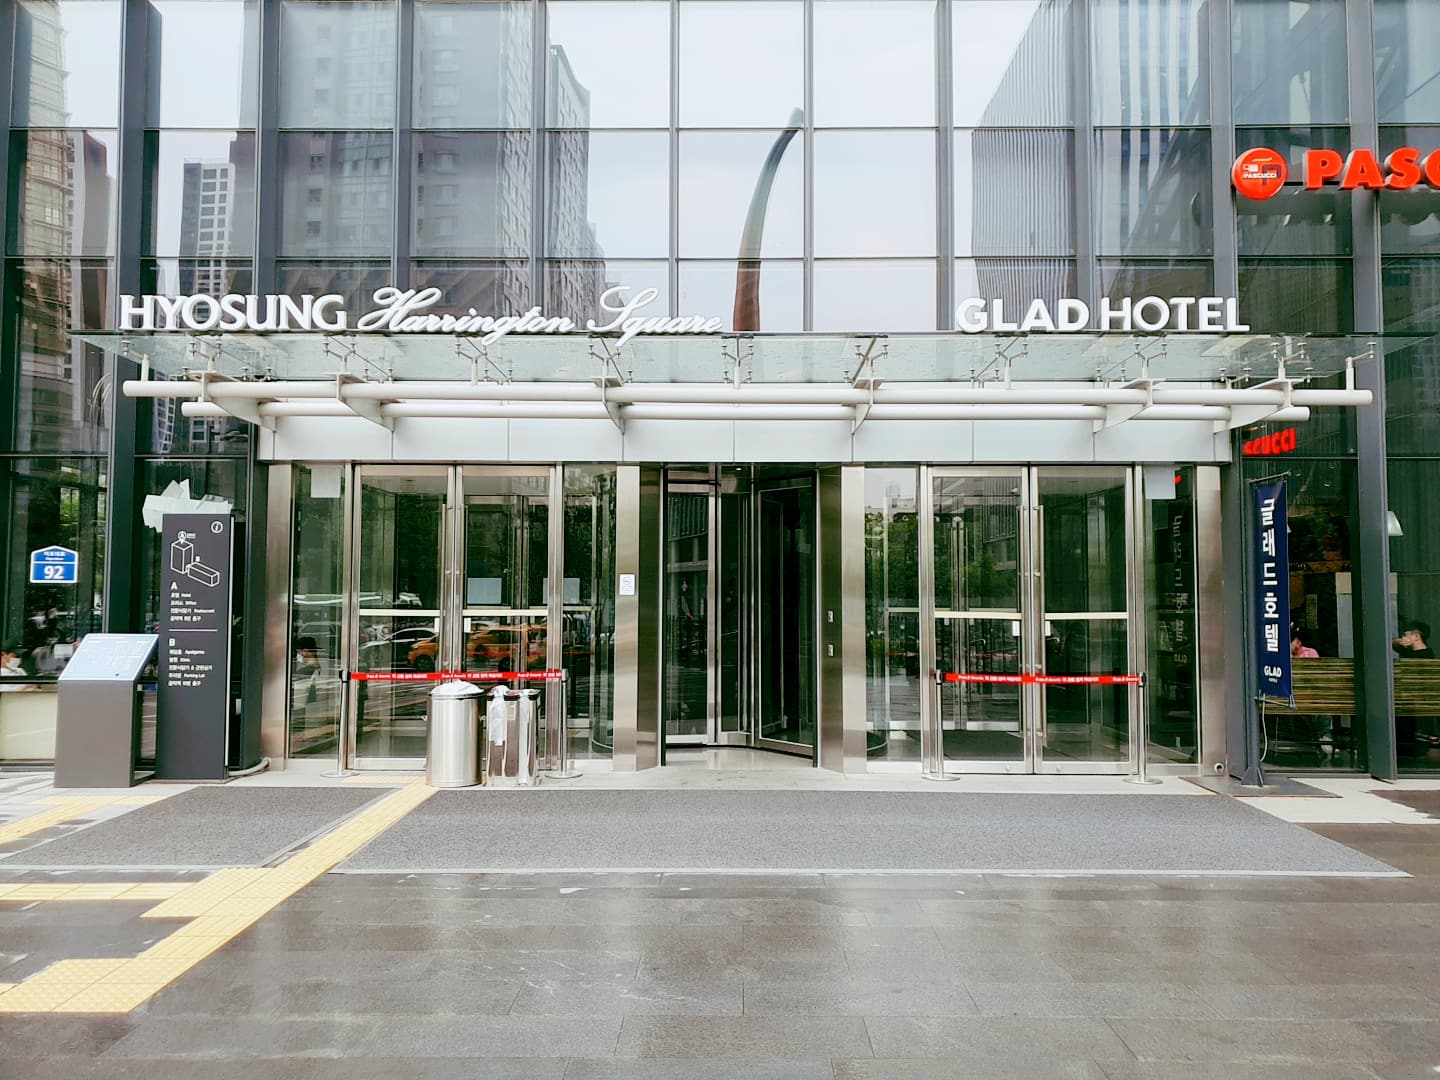 Entryway0 : The main entrance of the hotel from front view